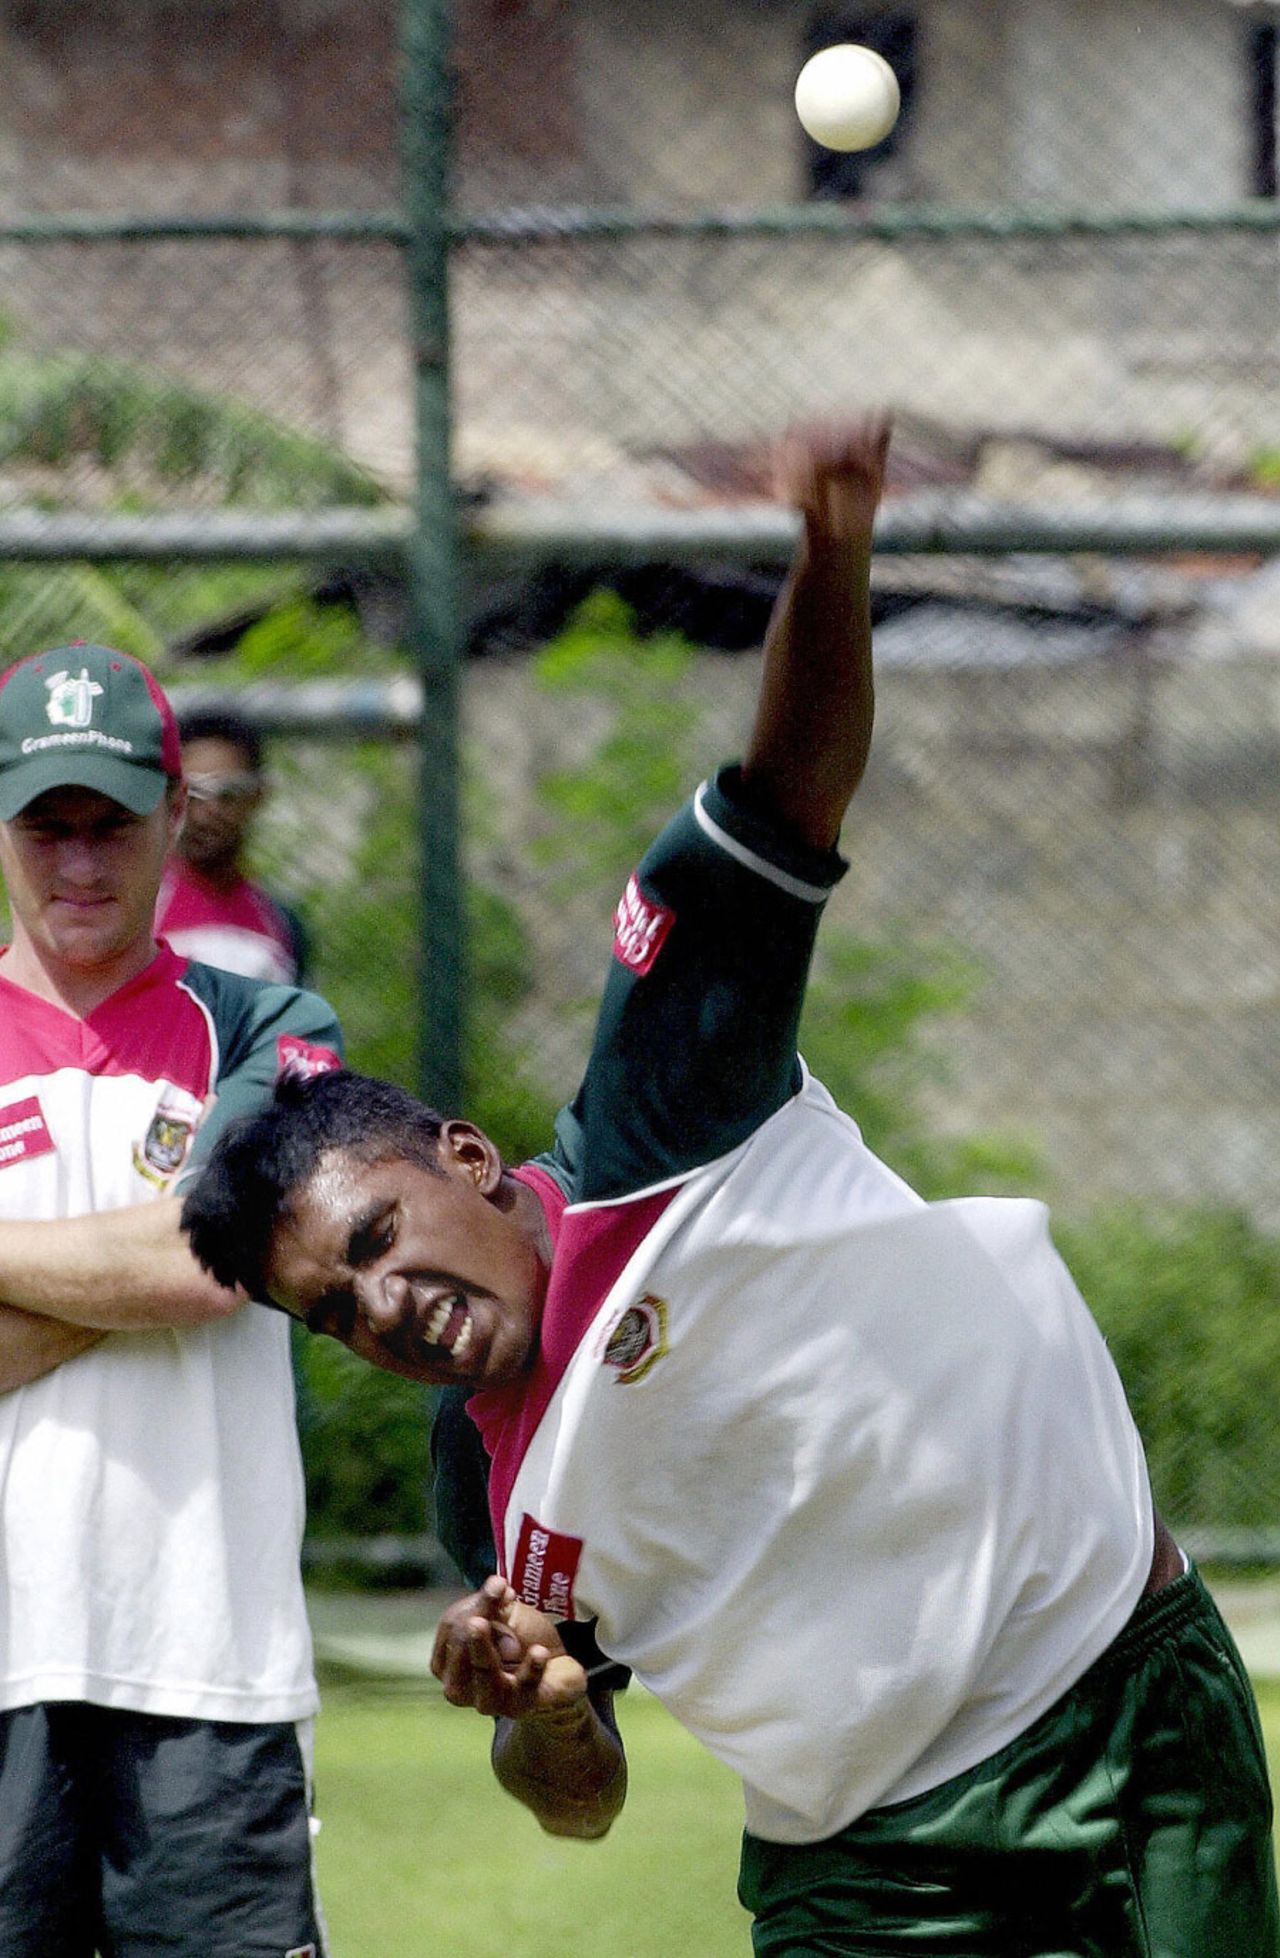 Manzural Islam bowls in the nets, Colombo, July 22, 2004